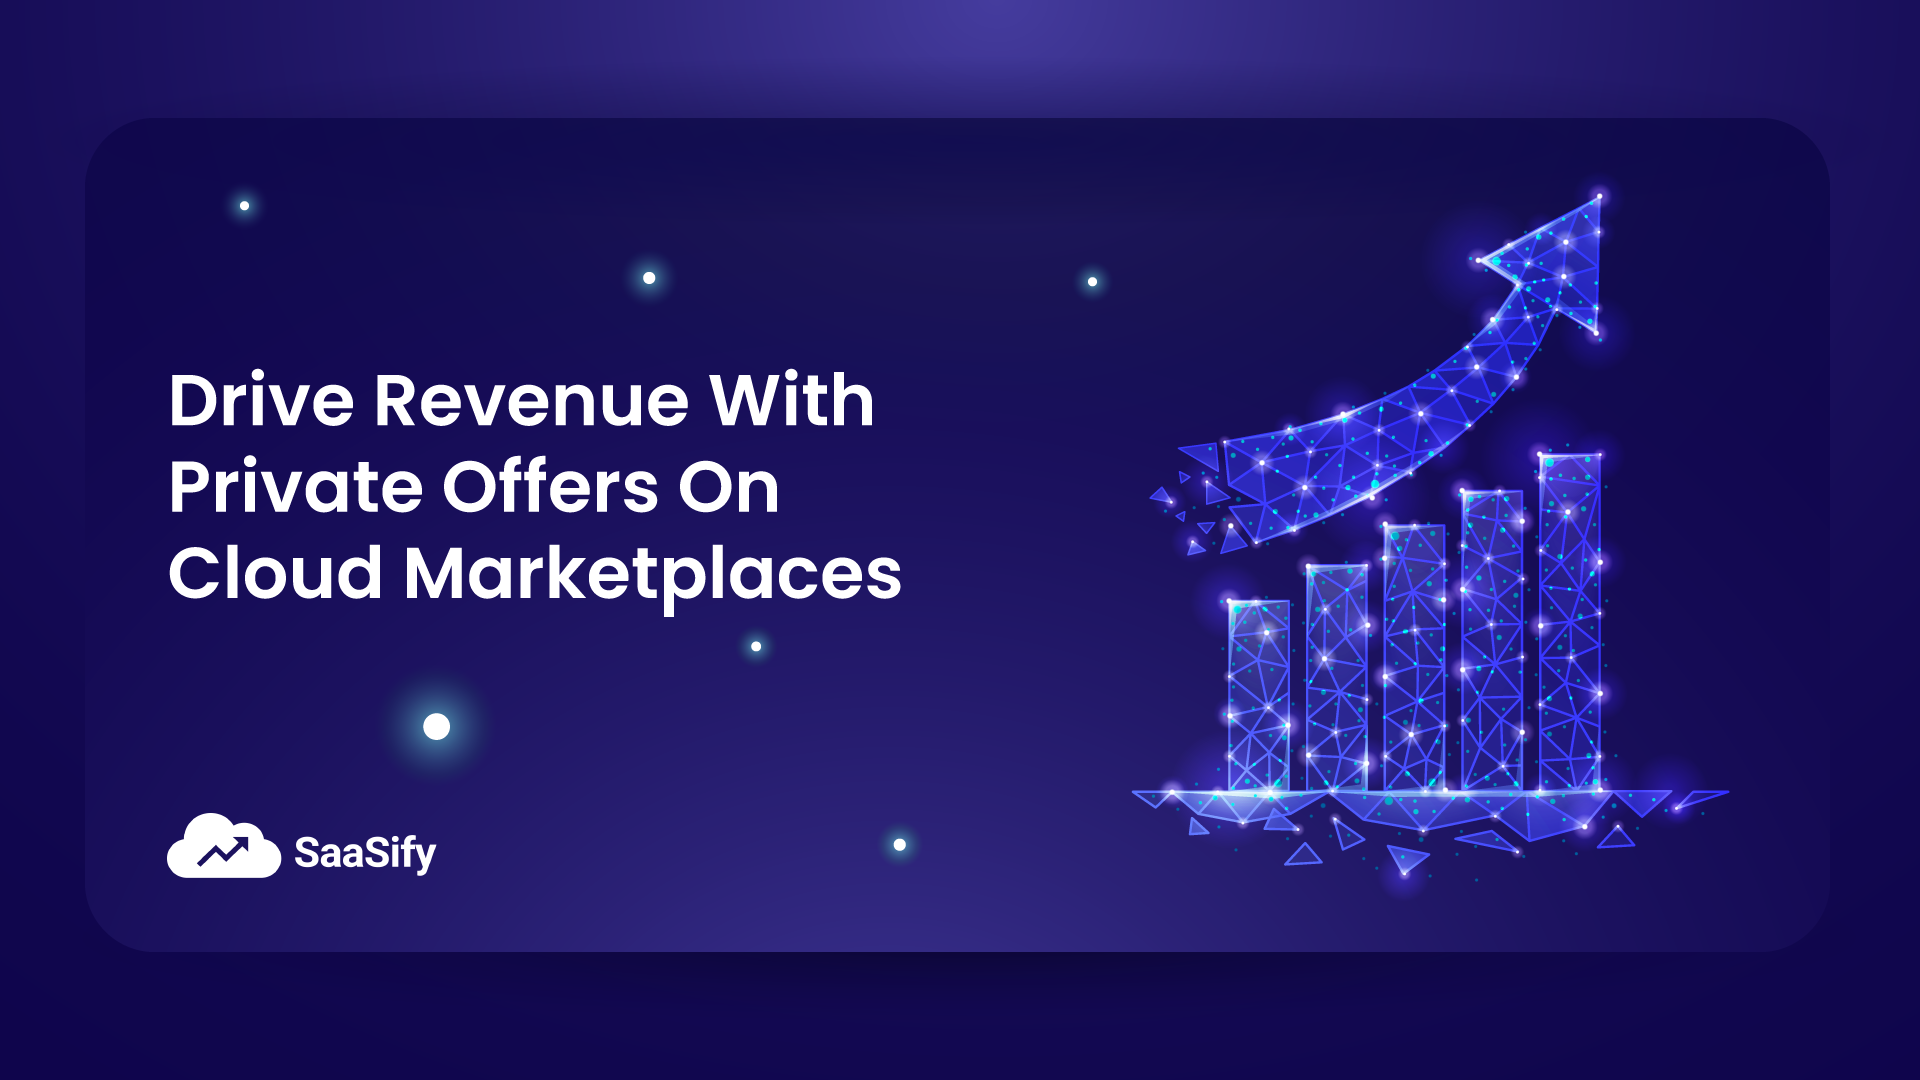 Drive revenue with private offers on cloud marketplaces